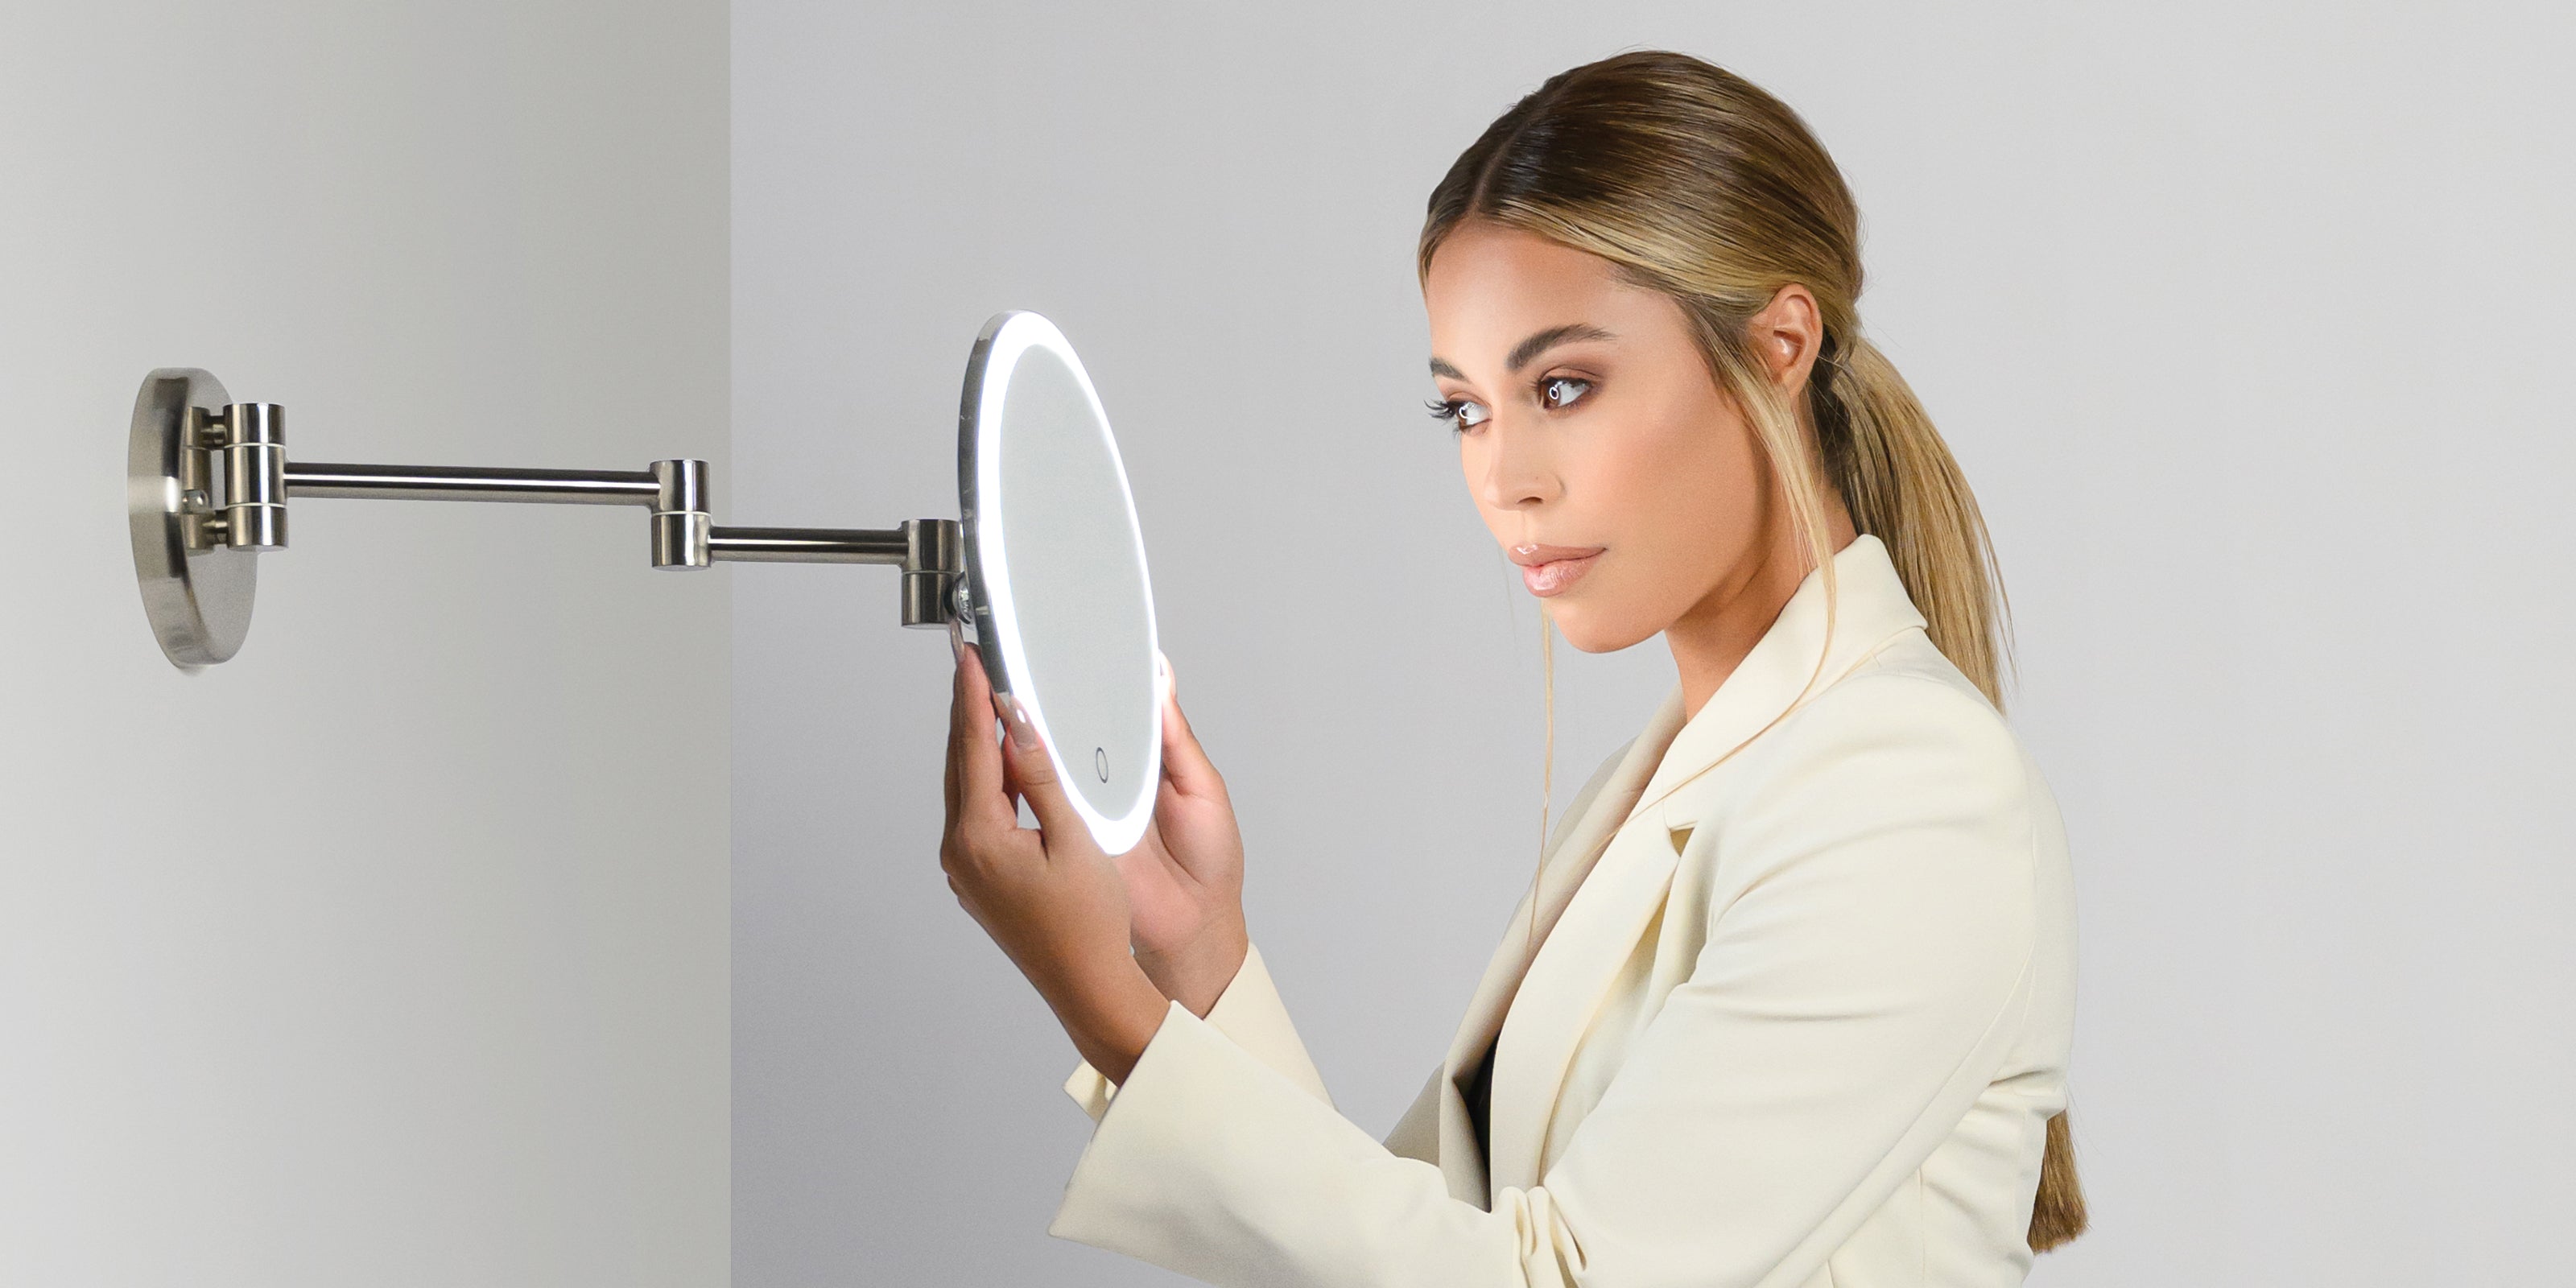 Ilios Lighting Wall Mirror with Retractable Arm for Makeup Application